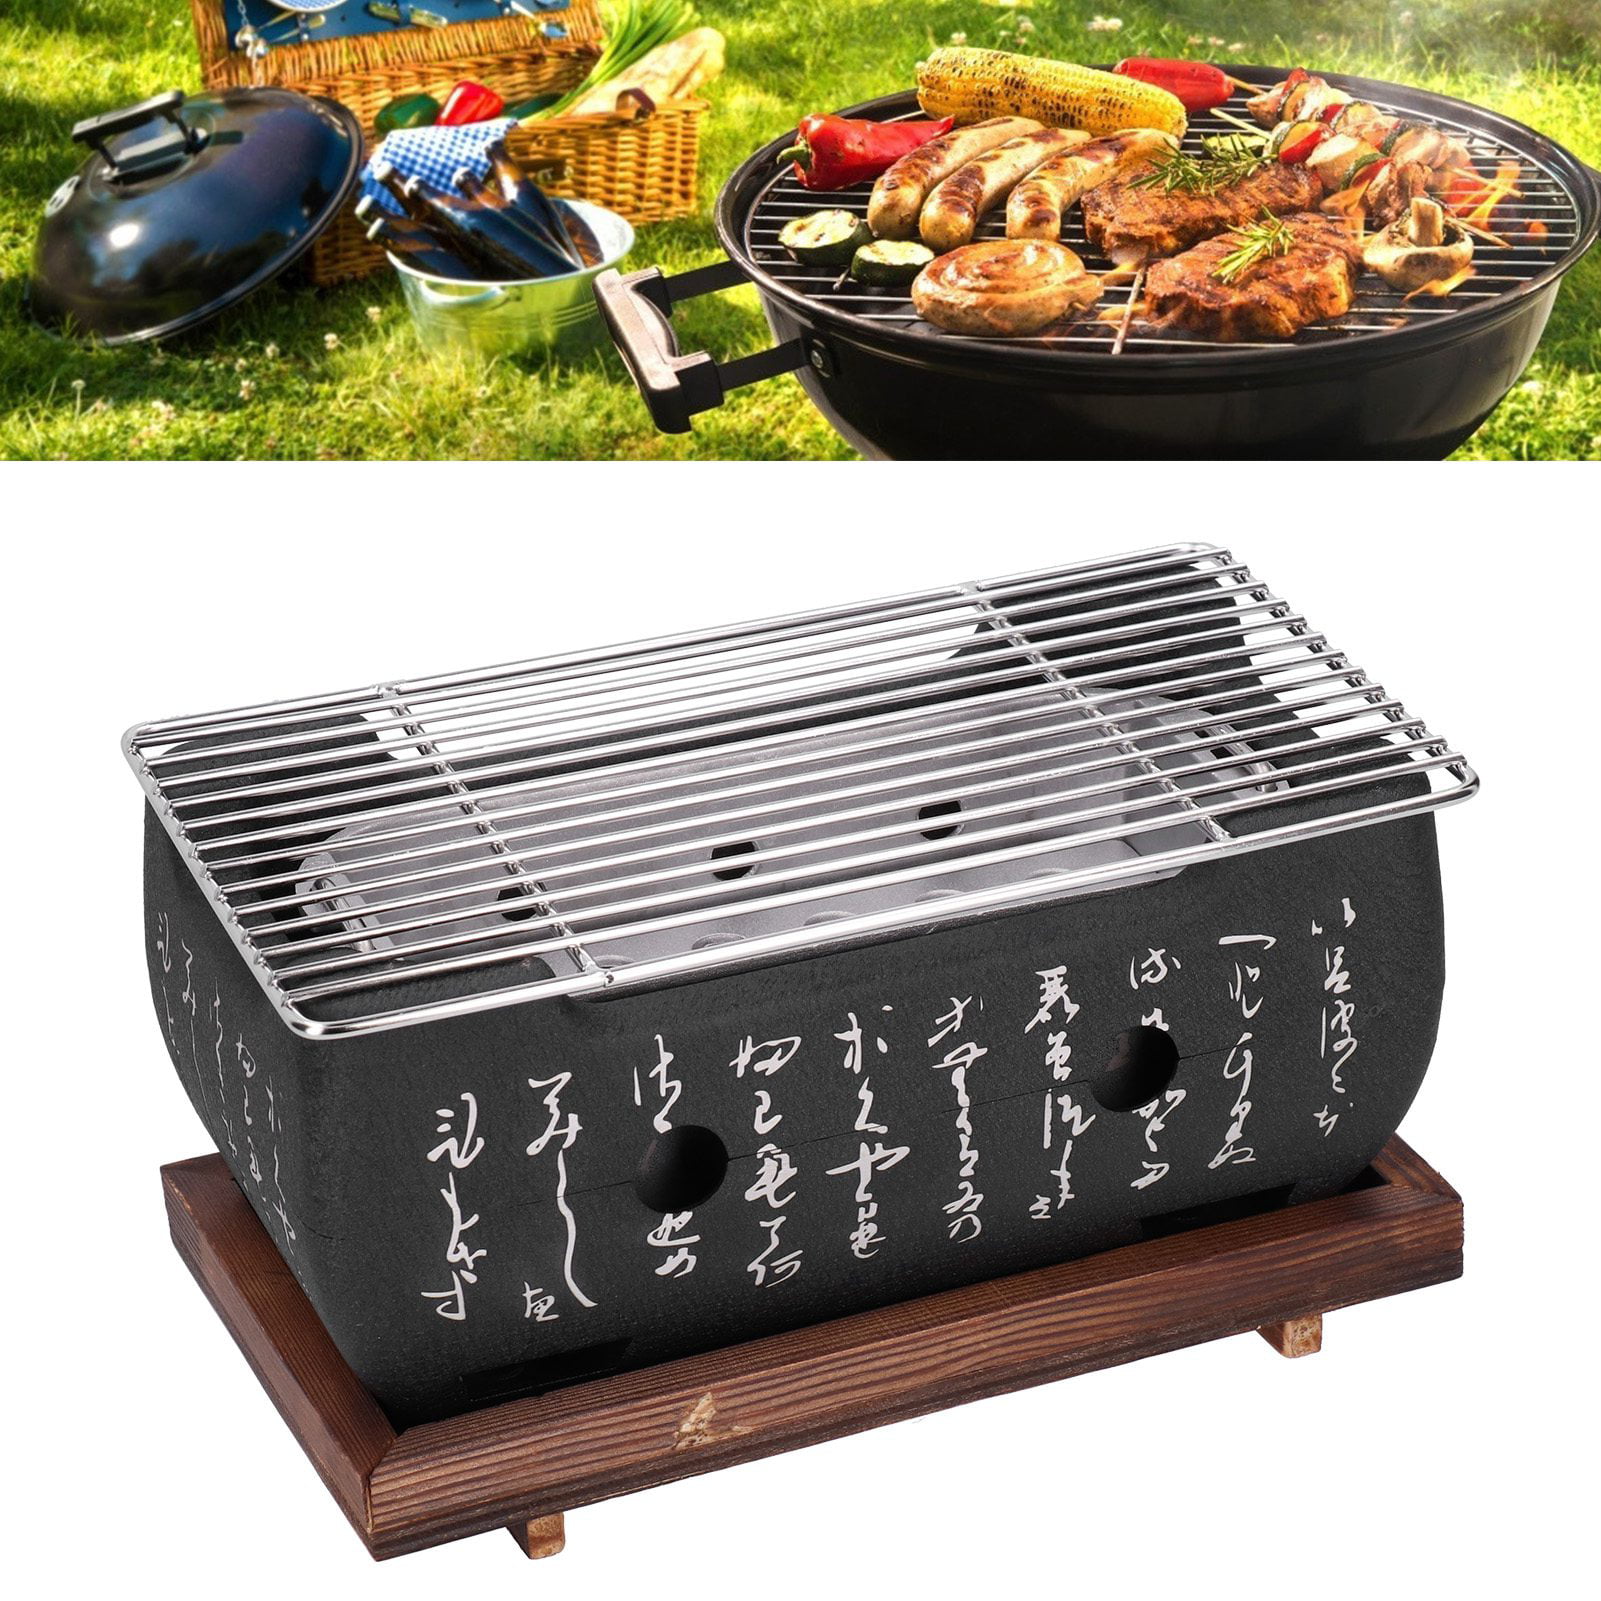 Portable Japanese Style Barbecue Grill Aluminum Alloy Grill